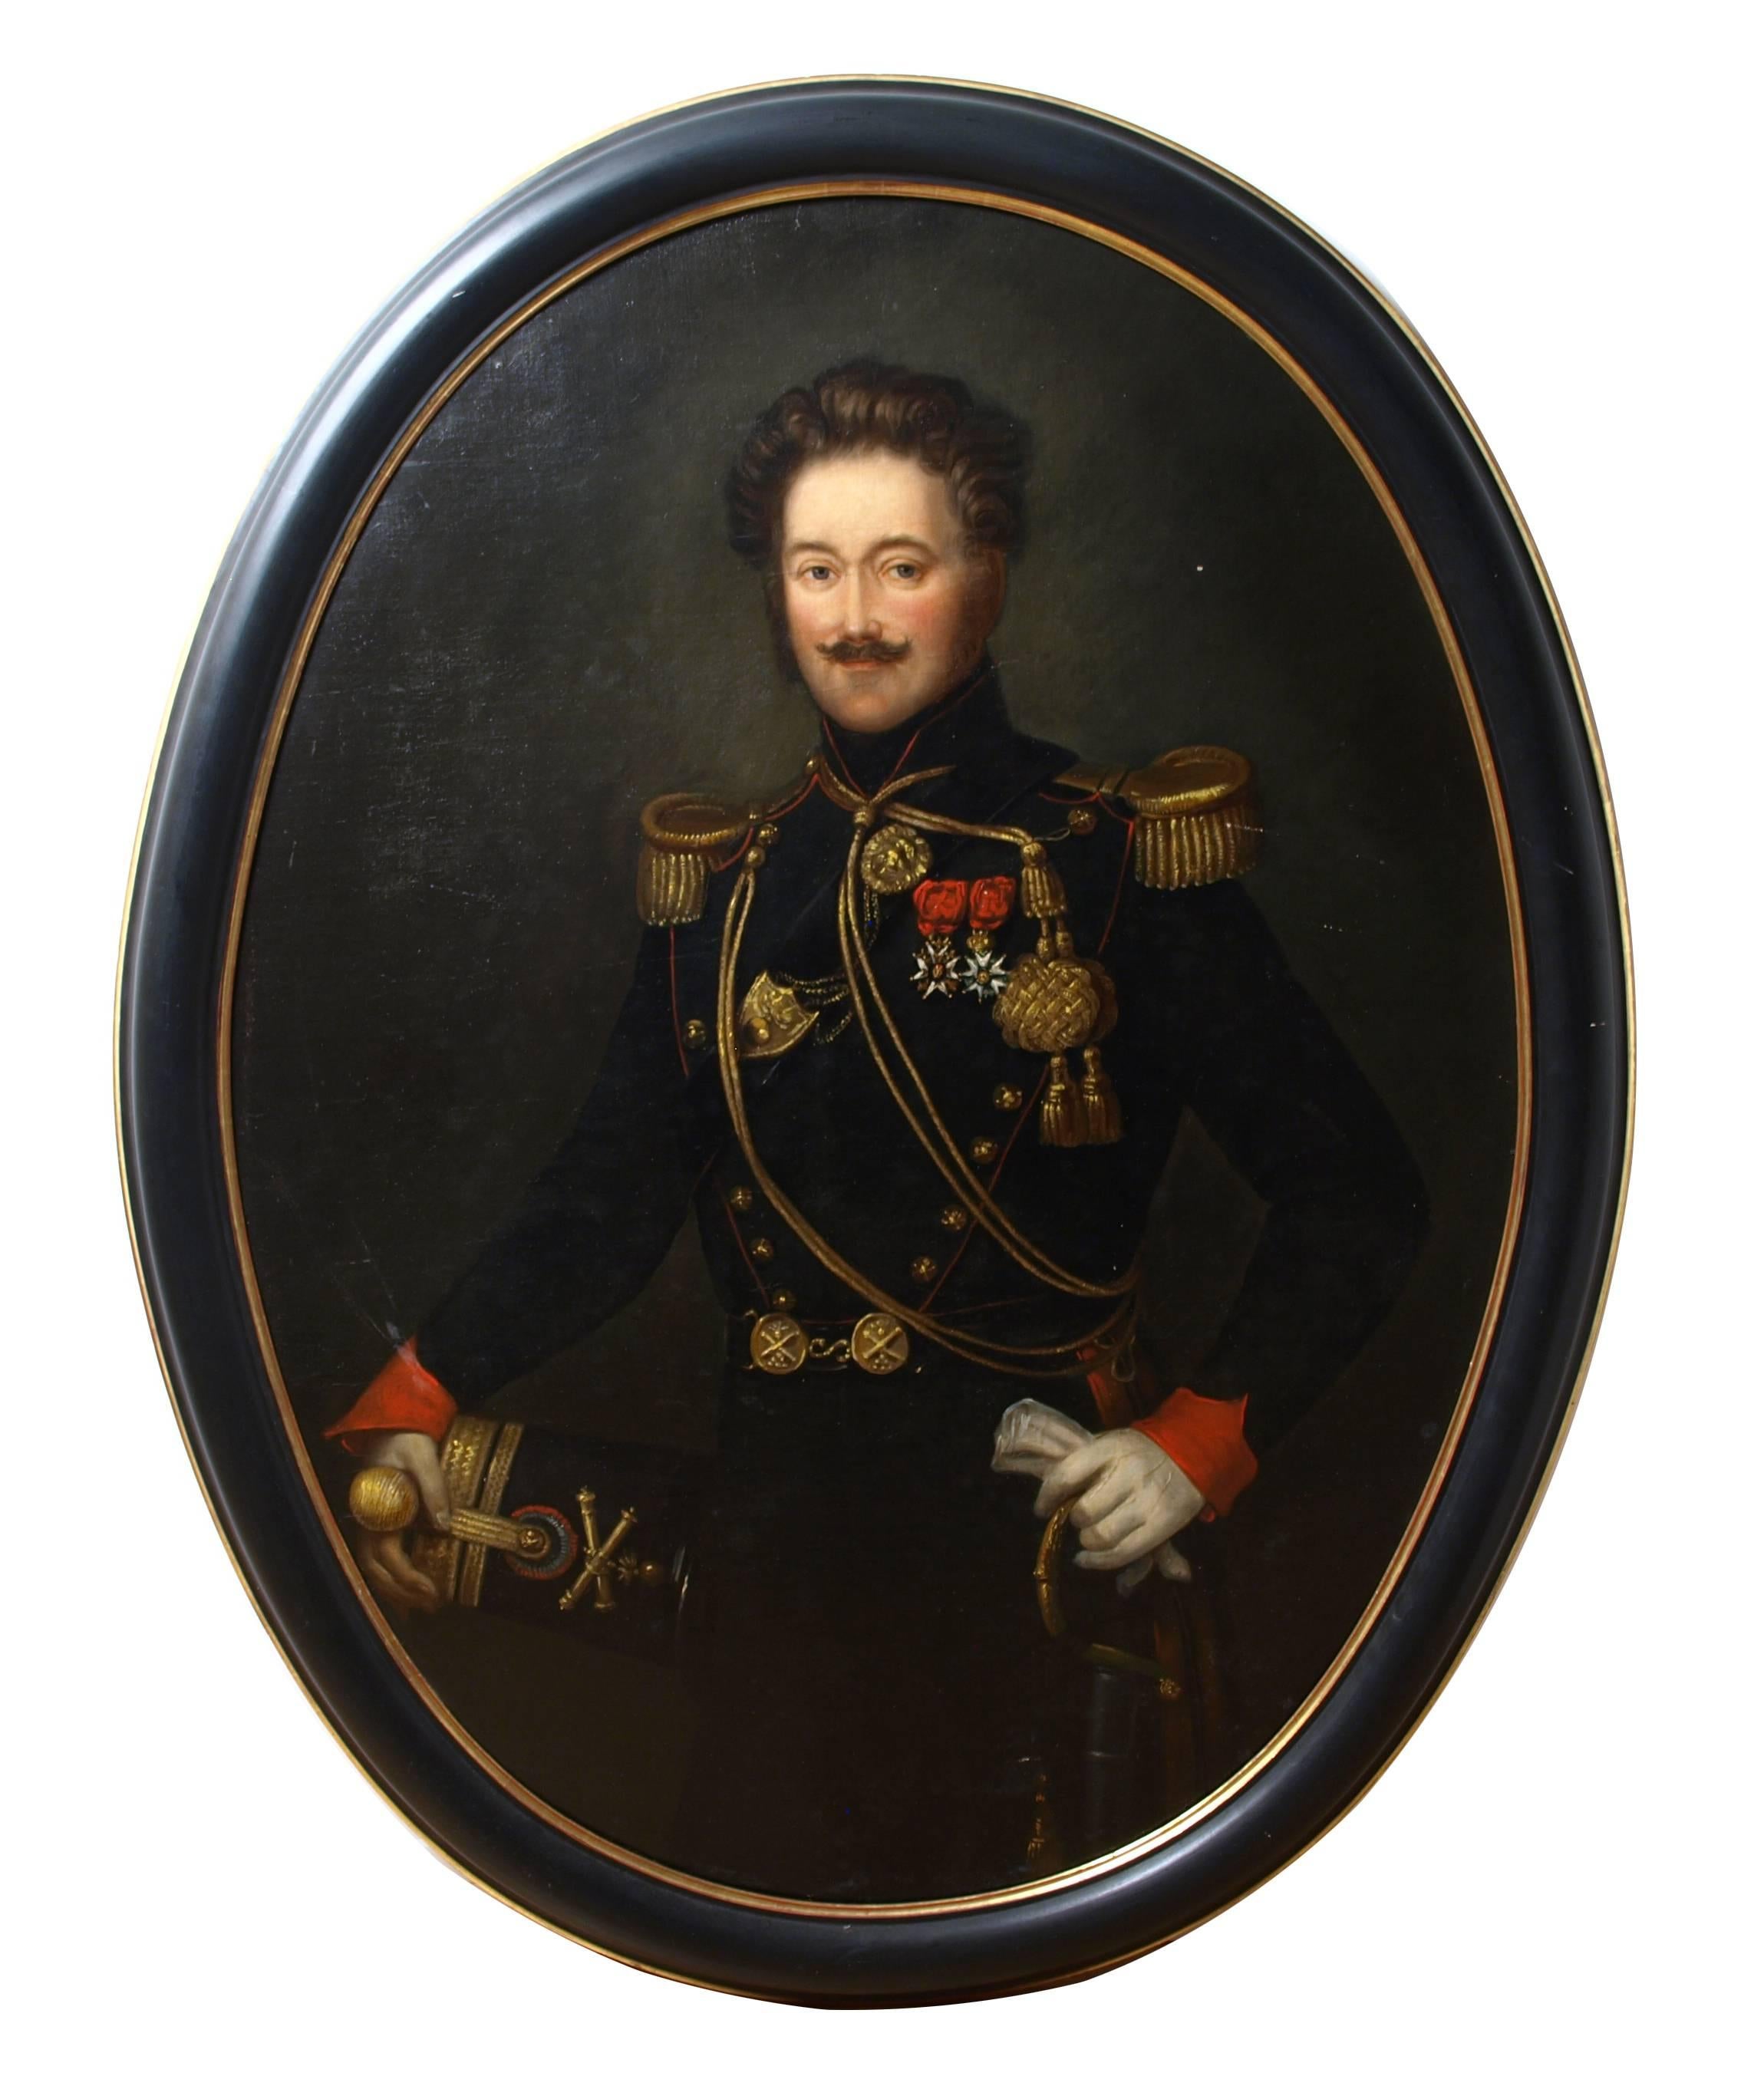 Unknown Portrait Painting - 19th Century portrait painting of a French military officer